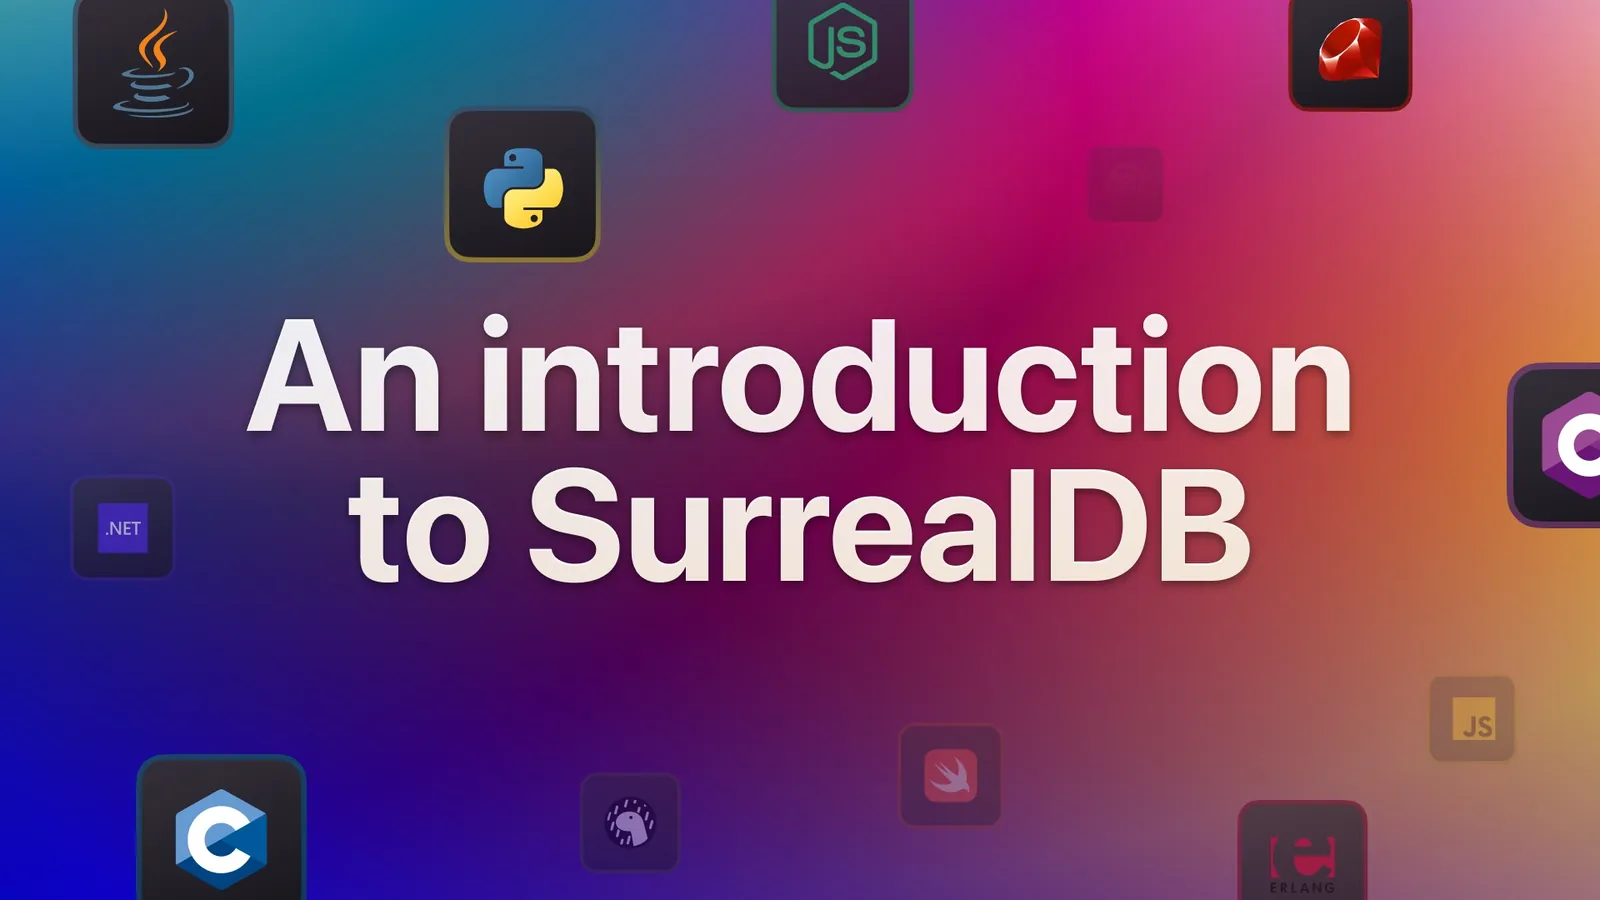 An introduction to SurrealDB